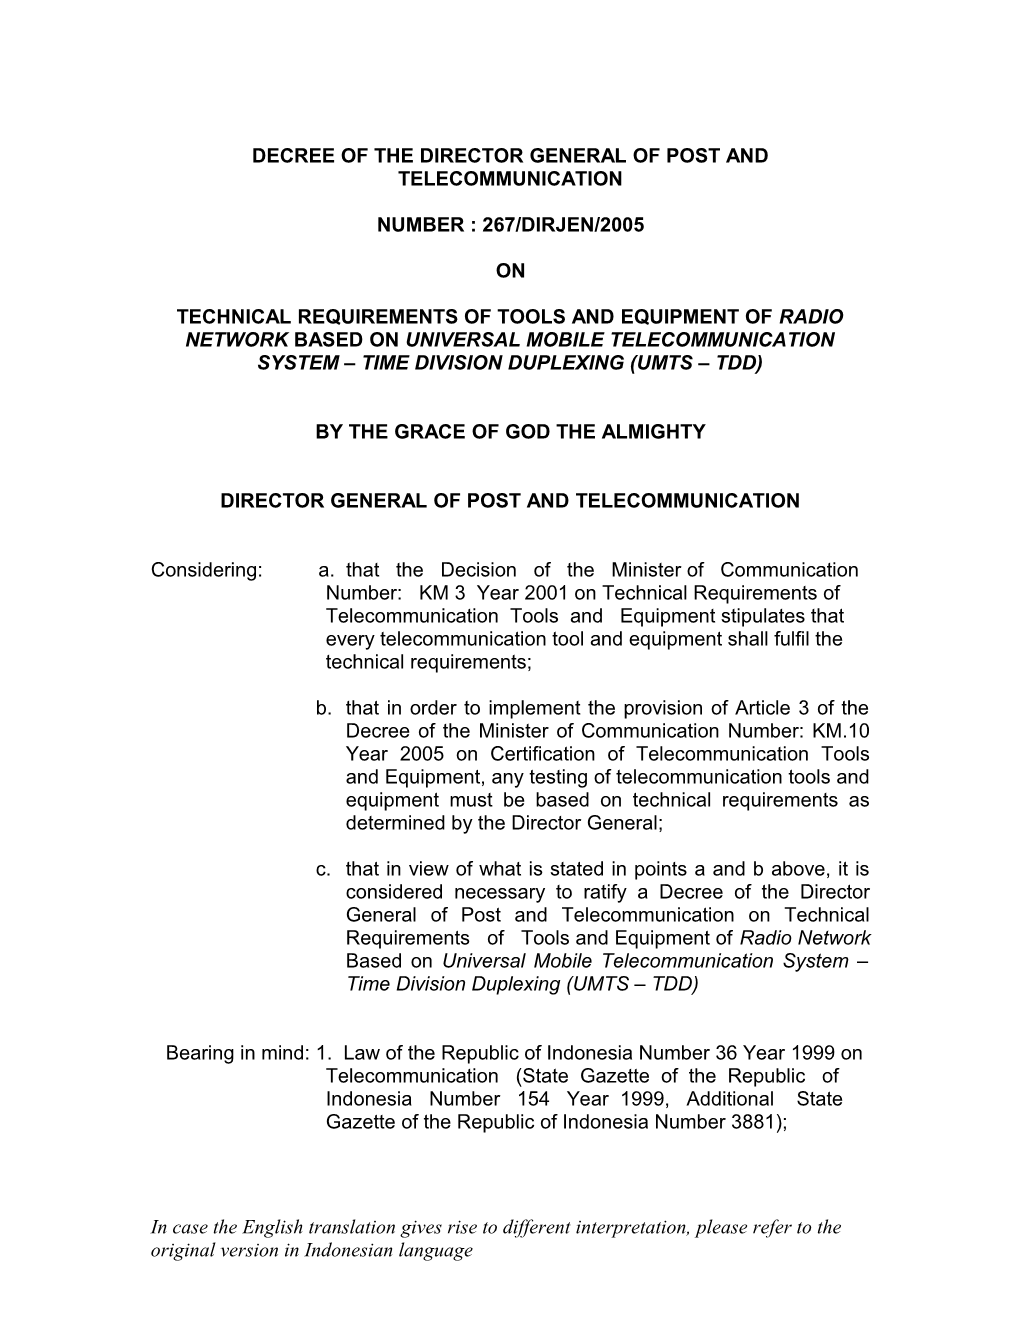 Decree of the Director General of Post and Telecommunication